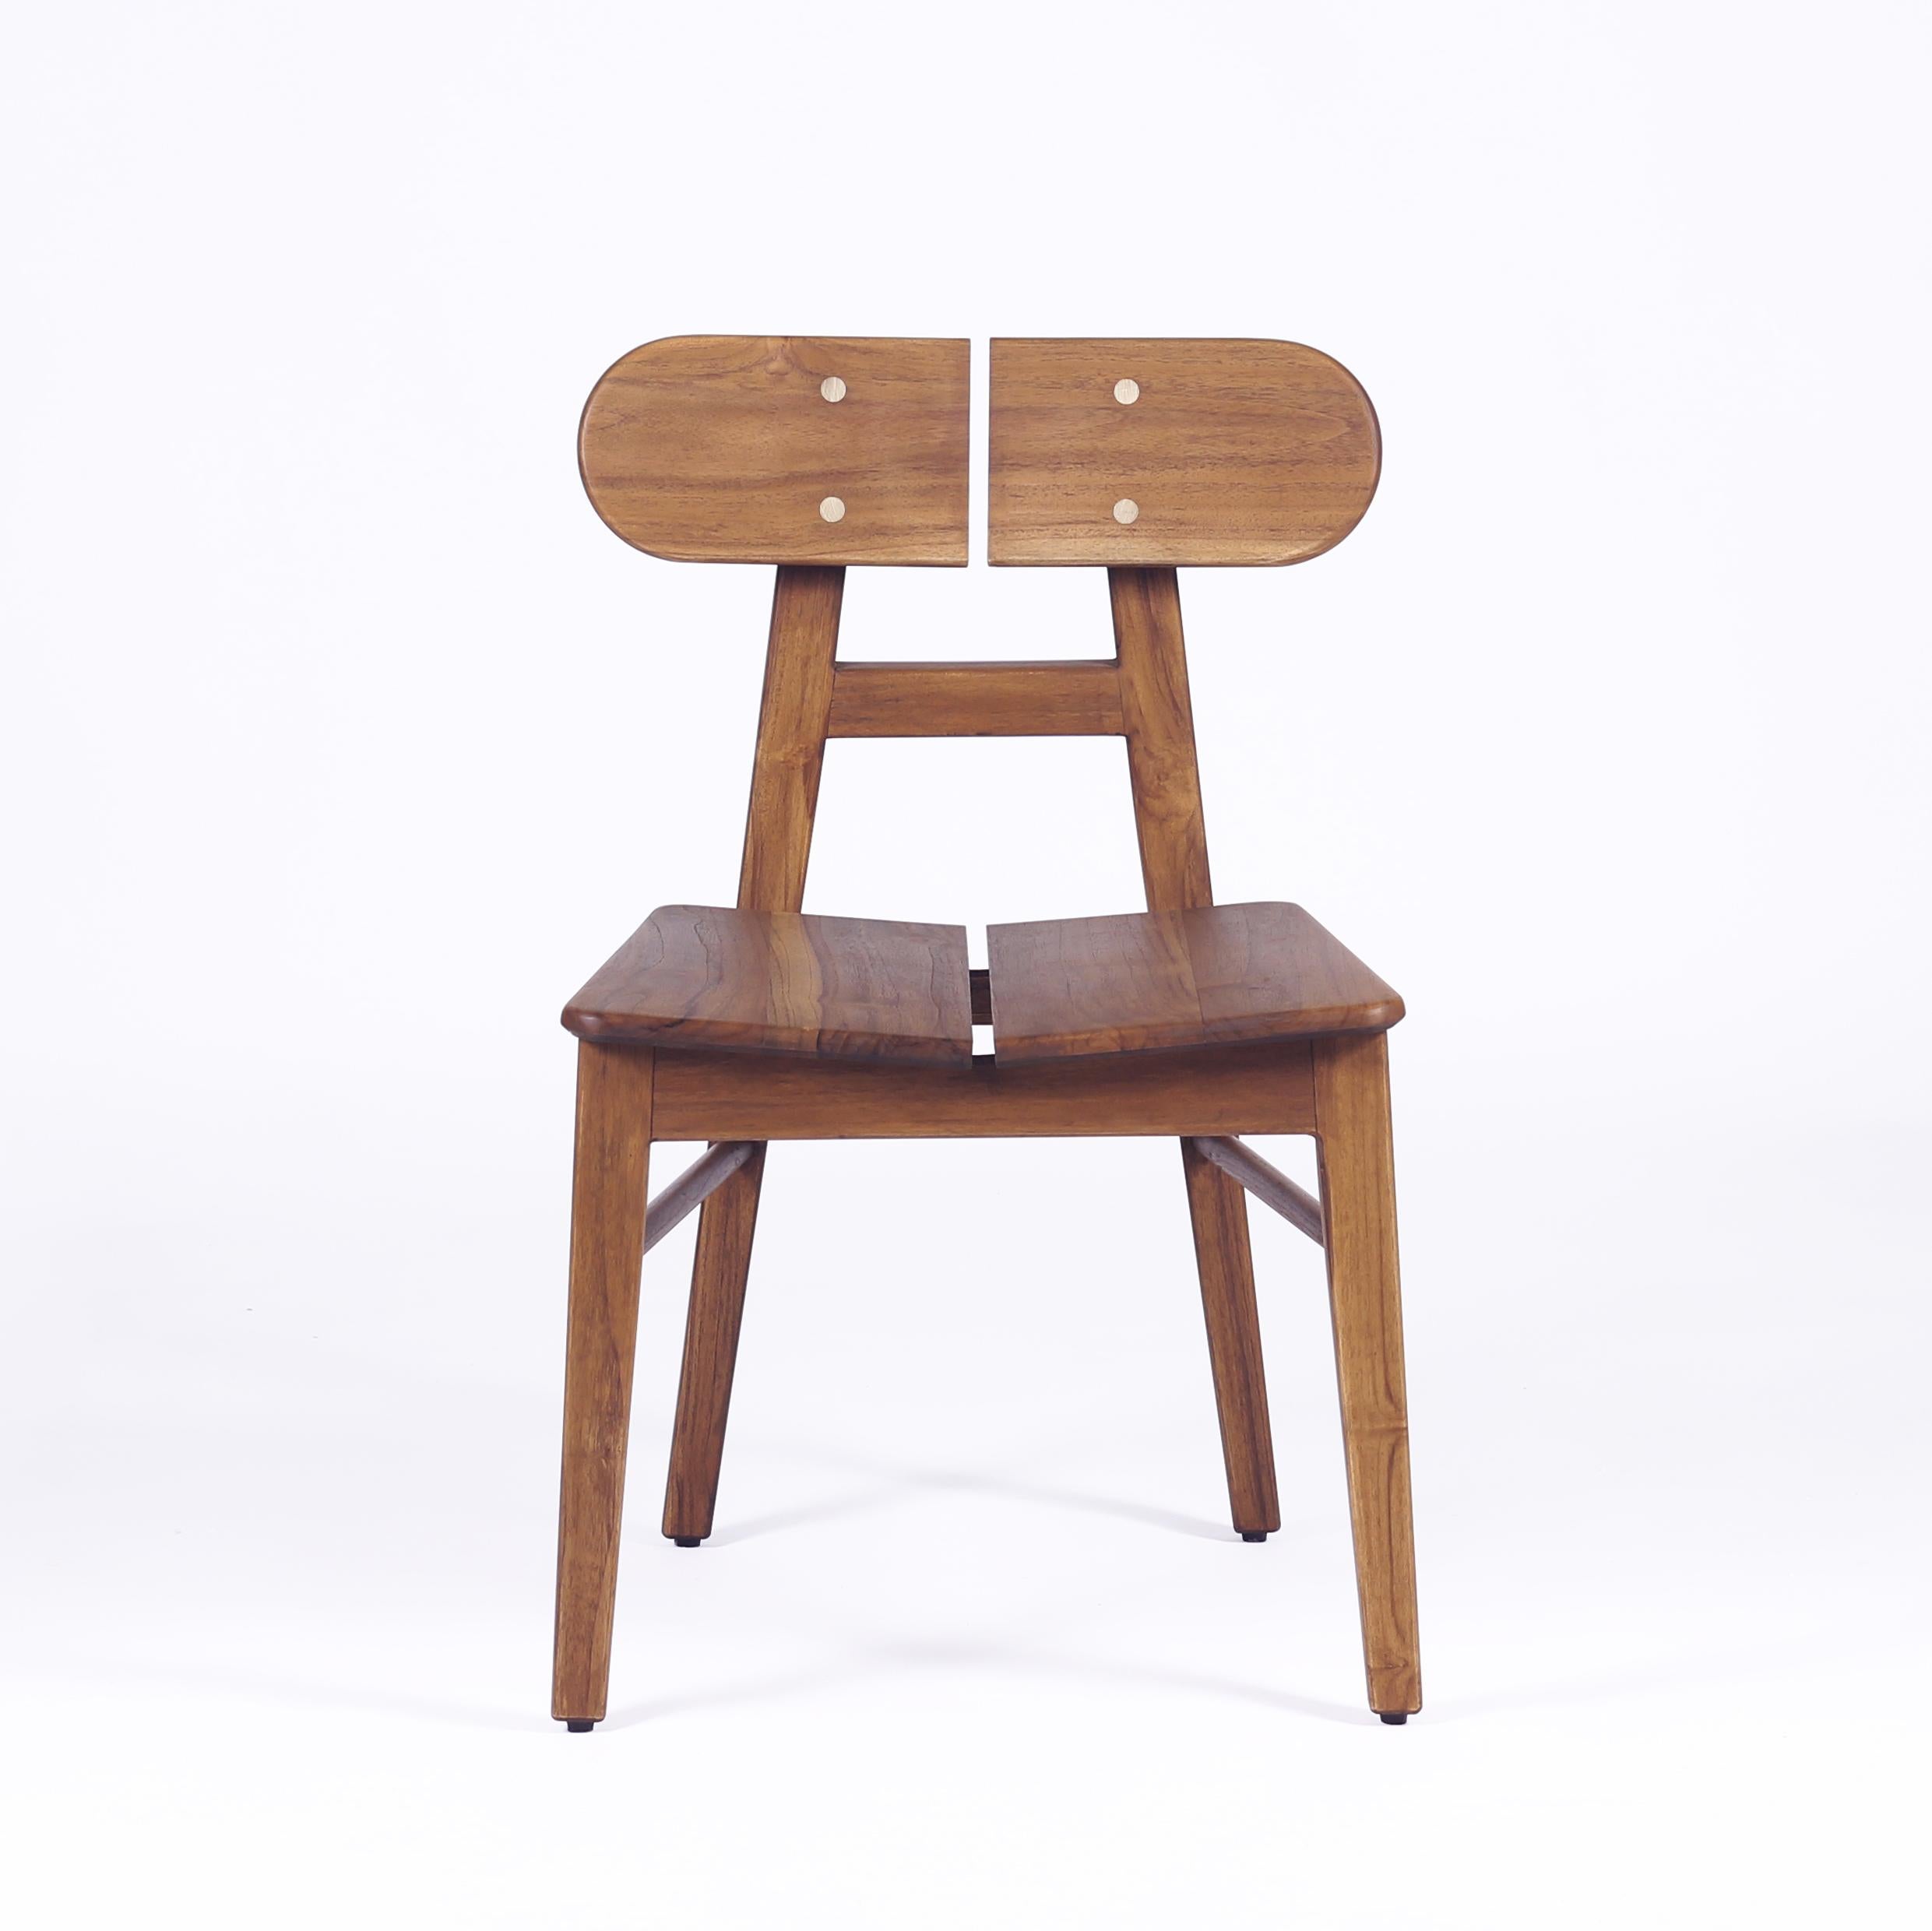 A set of 4 solid Oak wood chairs crafted for comfort and a timeless aesthetic, the BUTTERFLY chair design is inspired by the beauty of a butterfly and developed through a design philosophy of conscious minimalism. The design makes a sophisticated